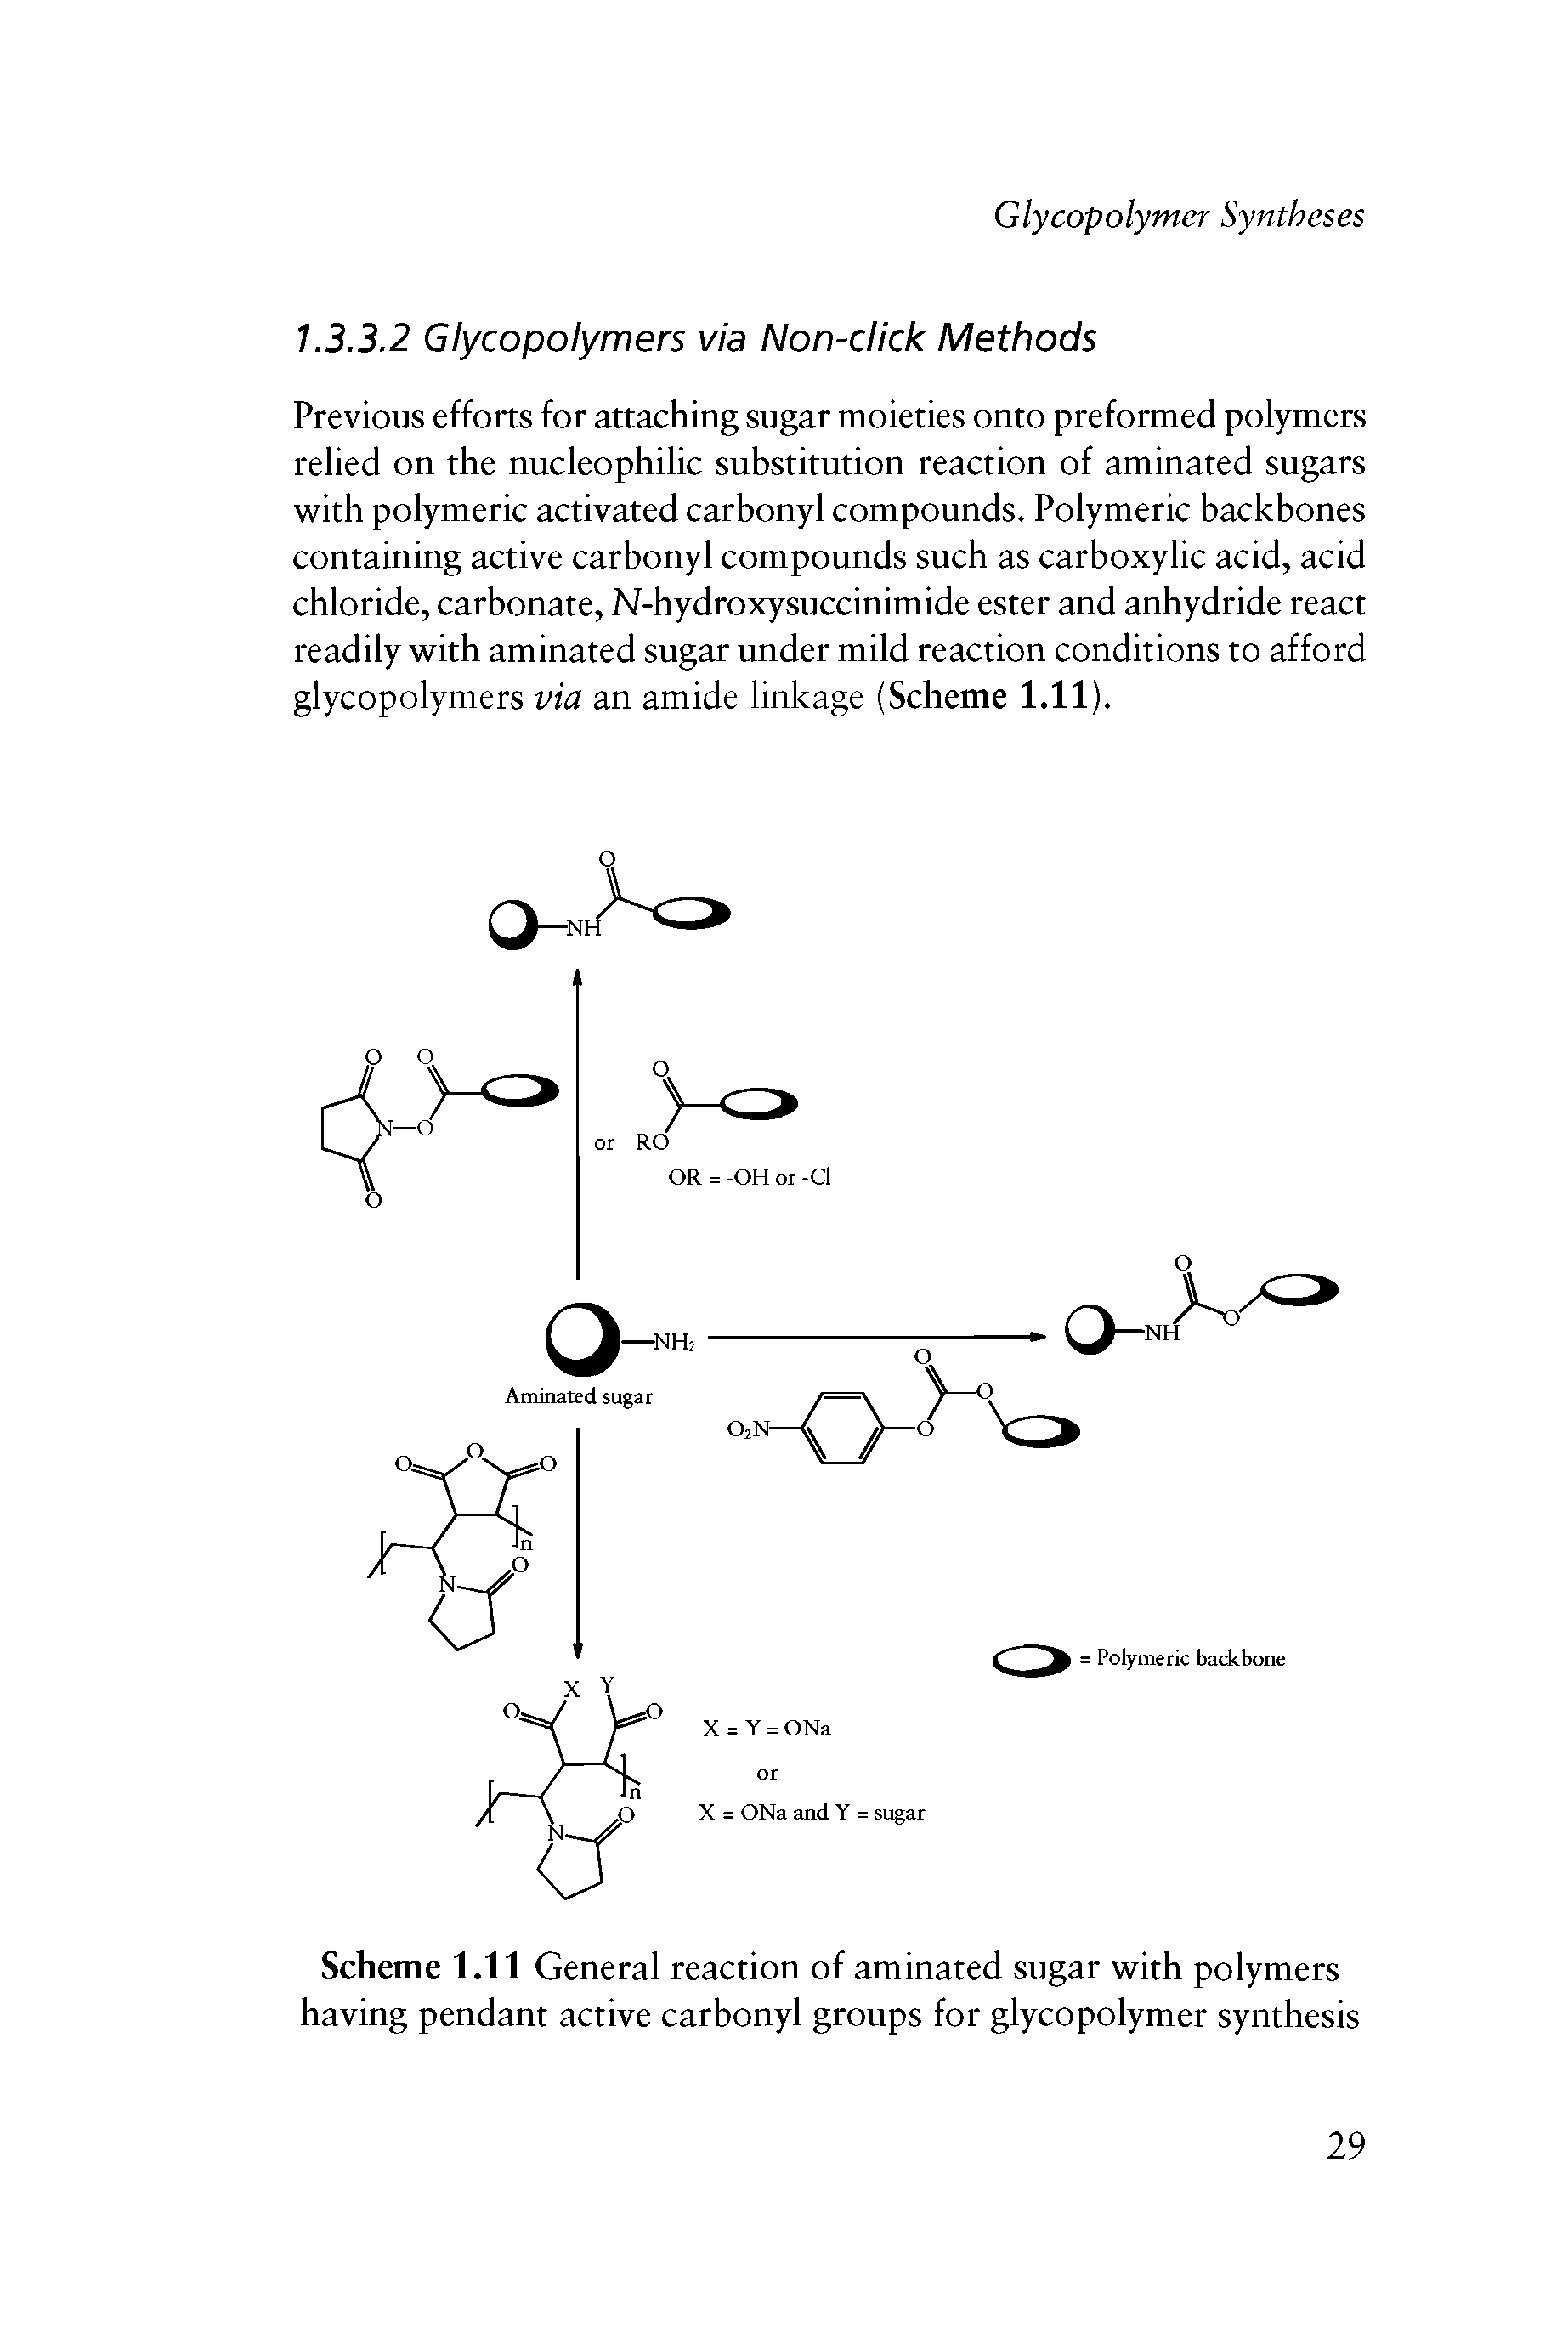 Scheme 1.11 General reaction of aminated sugar with polymers having pendant active carbonyl groups for glycopolymer synthesis...